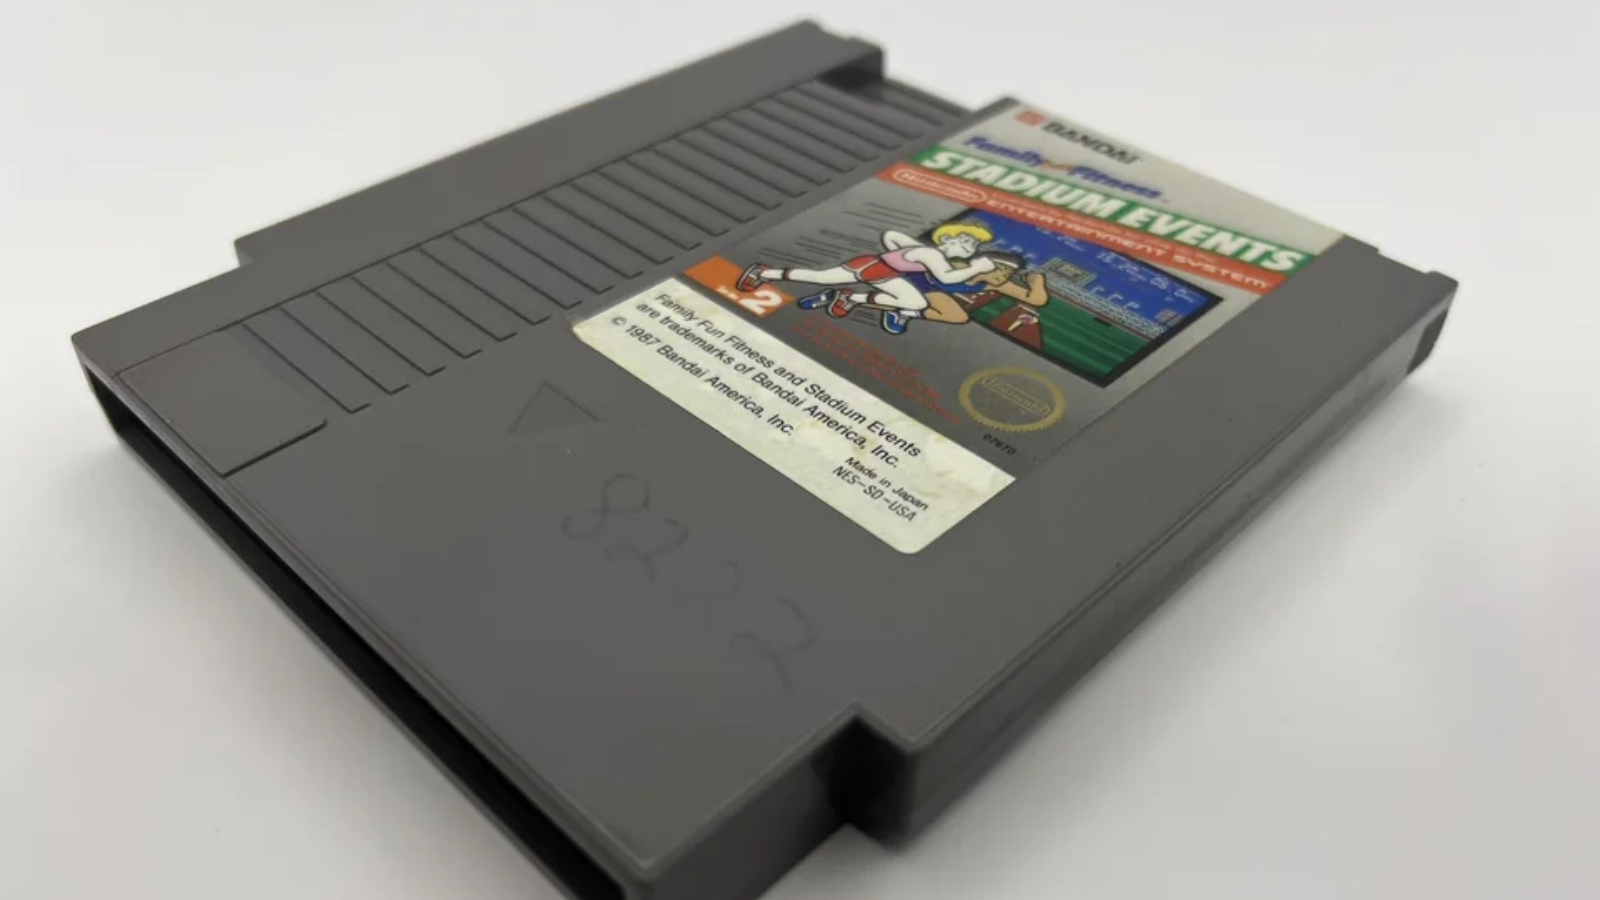 Esports team owner finds ‘Holy Grail’ Nintendo game worth $20,000 in childhood collection